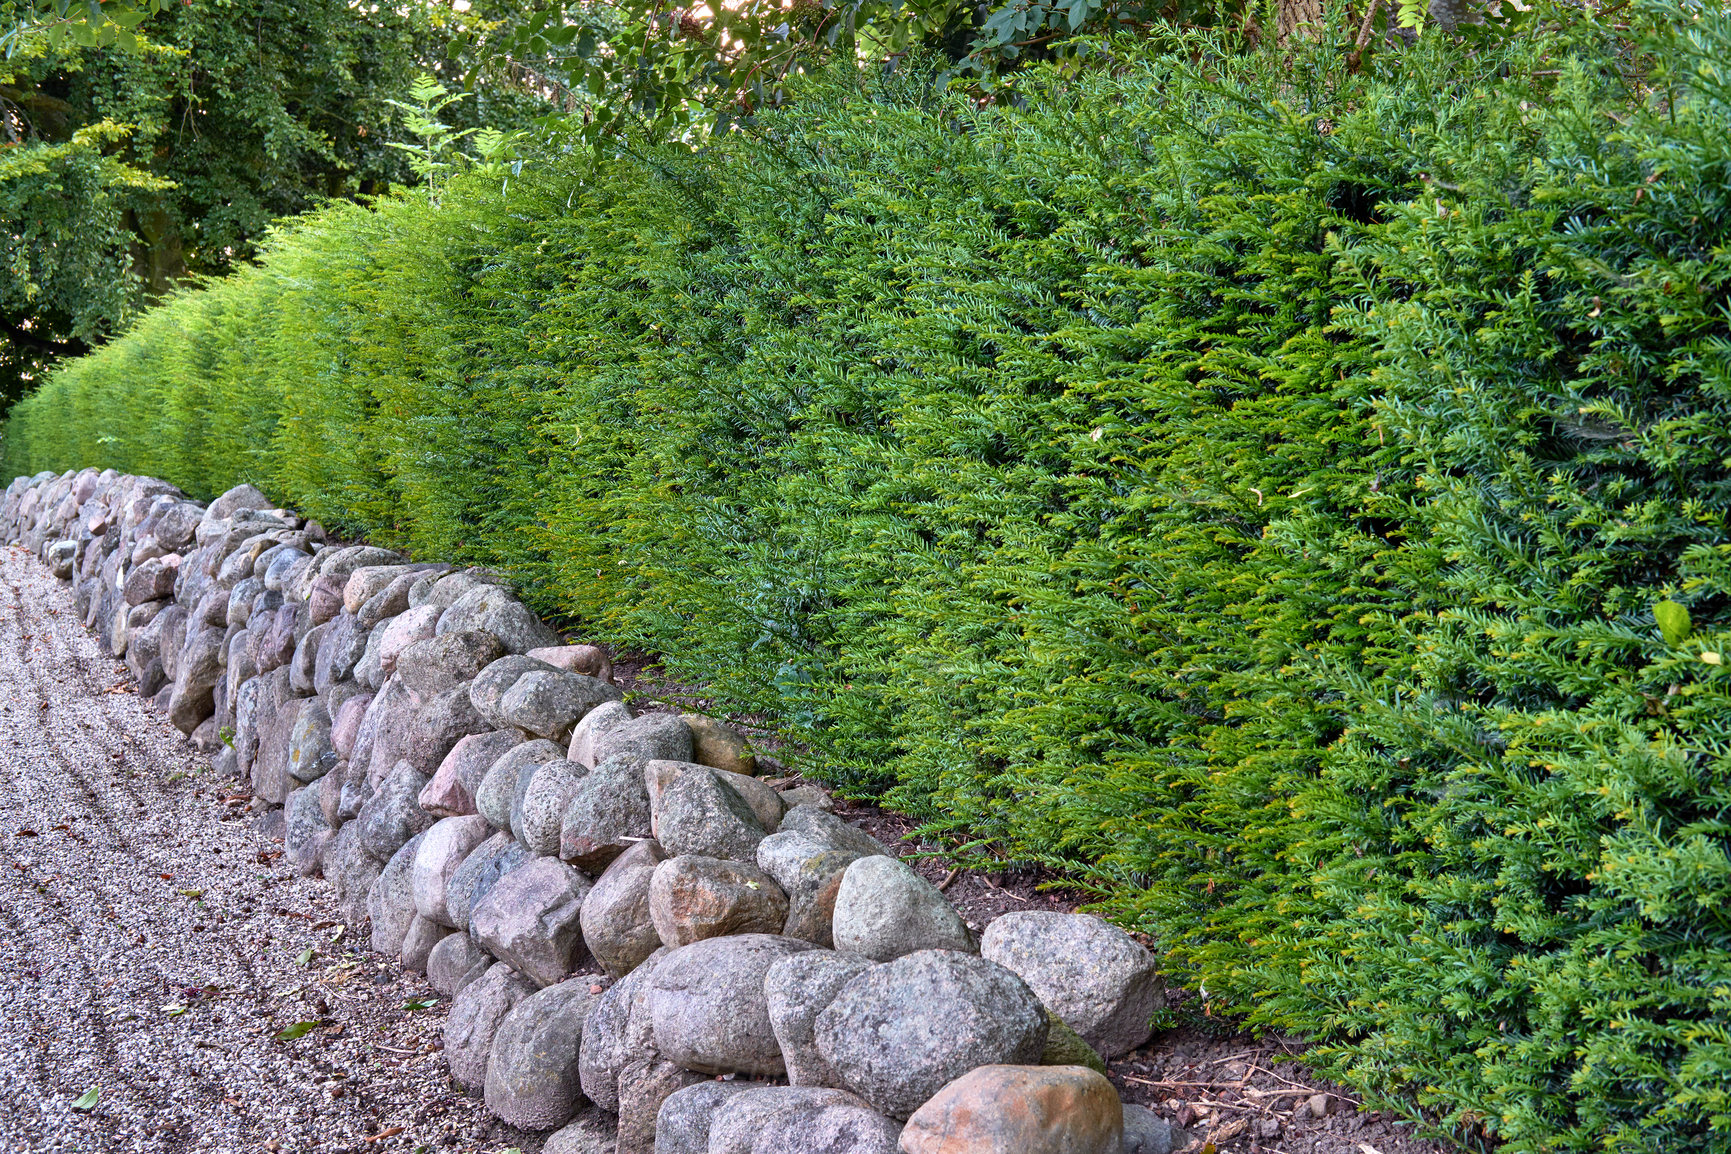 Buy stock photo Landscaping with rocks and ferns as a boundary wall with copy space. Plants and shrubs growing in a hedge in a lush garden. Exterior architecture with a rocky fence enclosure in nature outdoors